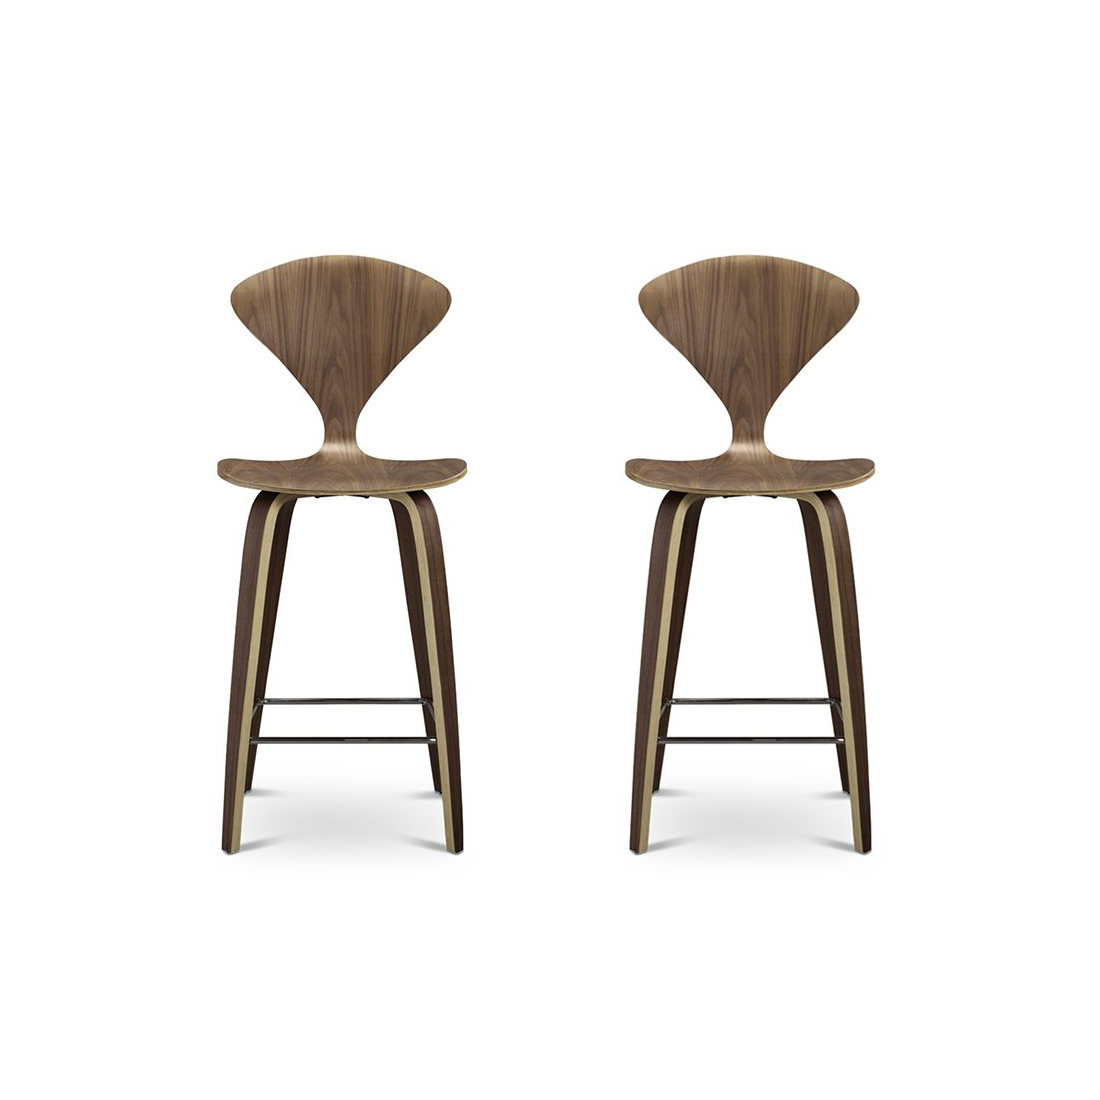 Set of Two Norman Counter Stools - Eternity Modern